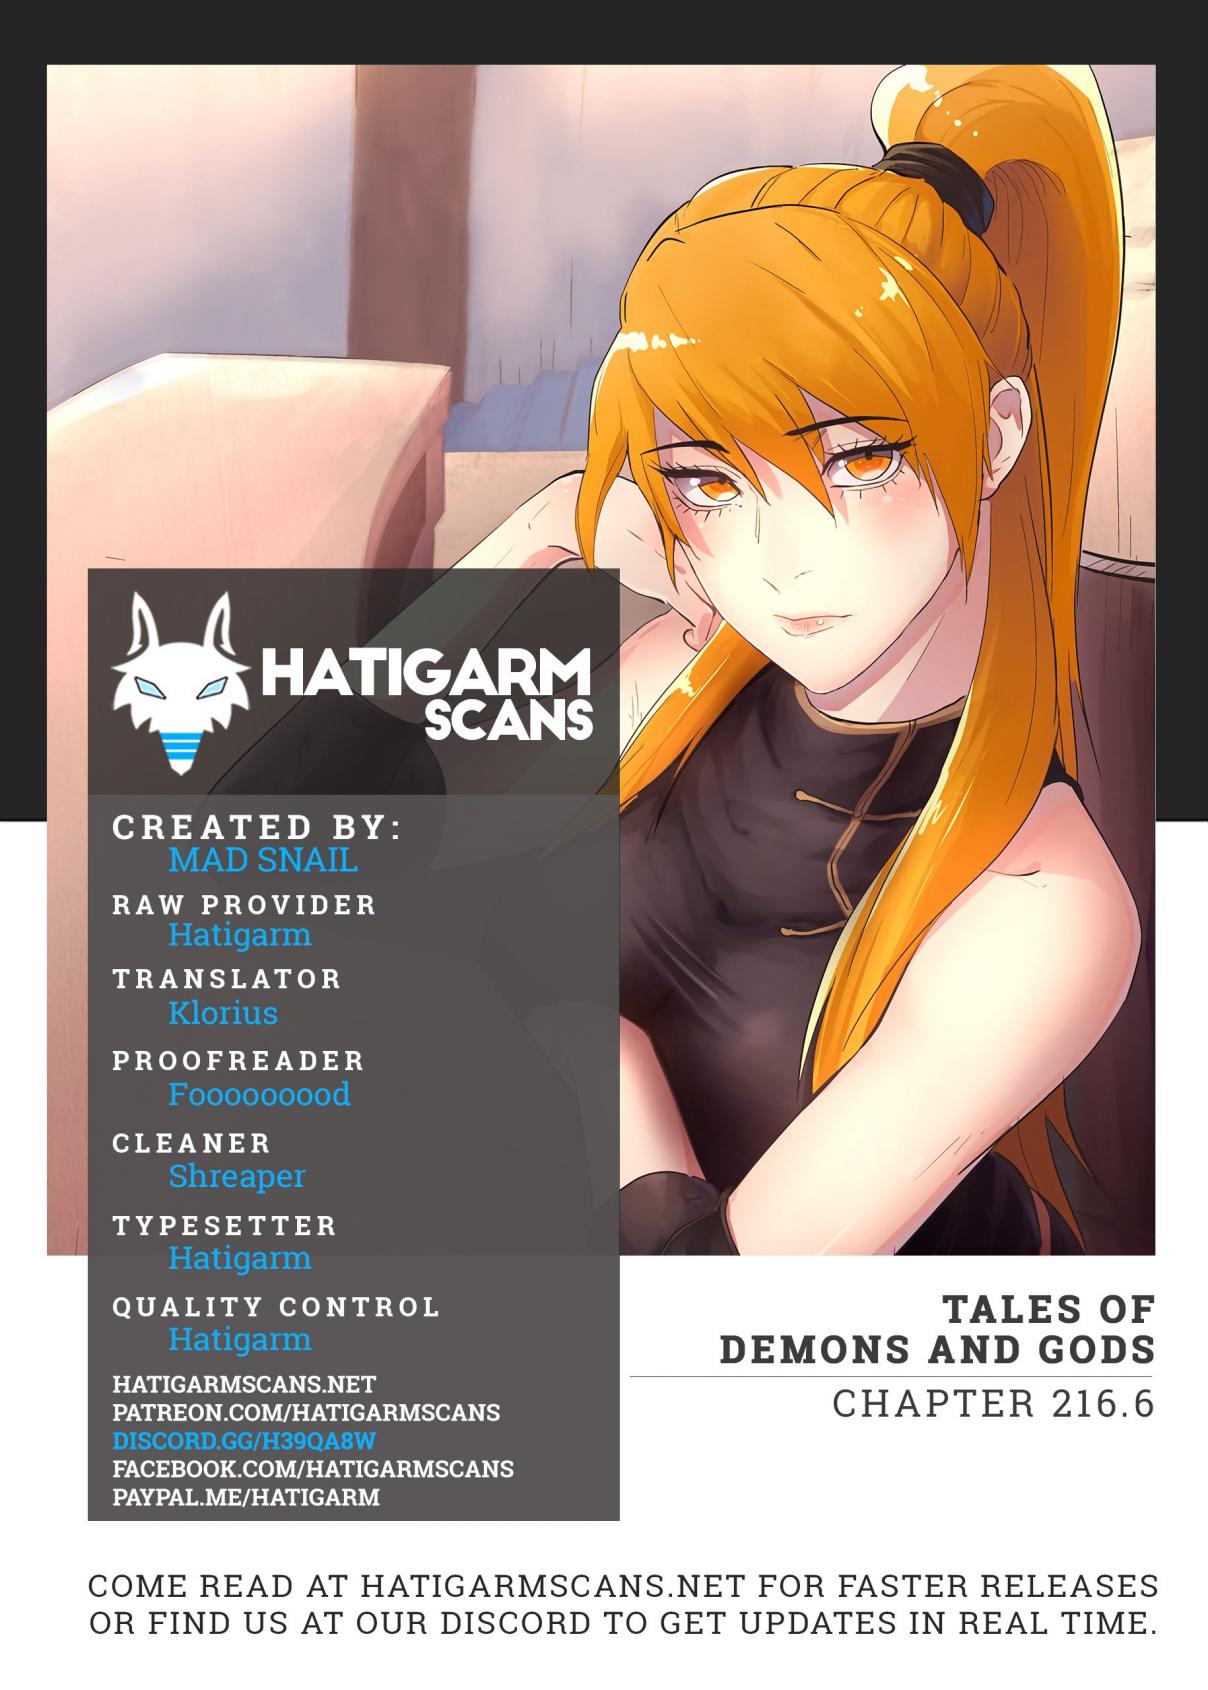 Tales of Demons and Gods Chap 216.6